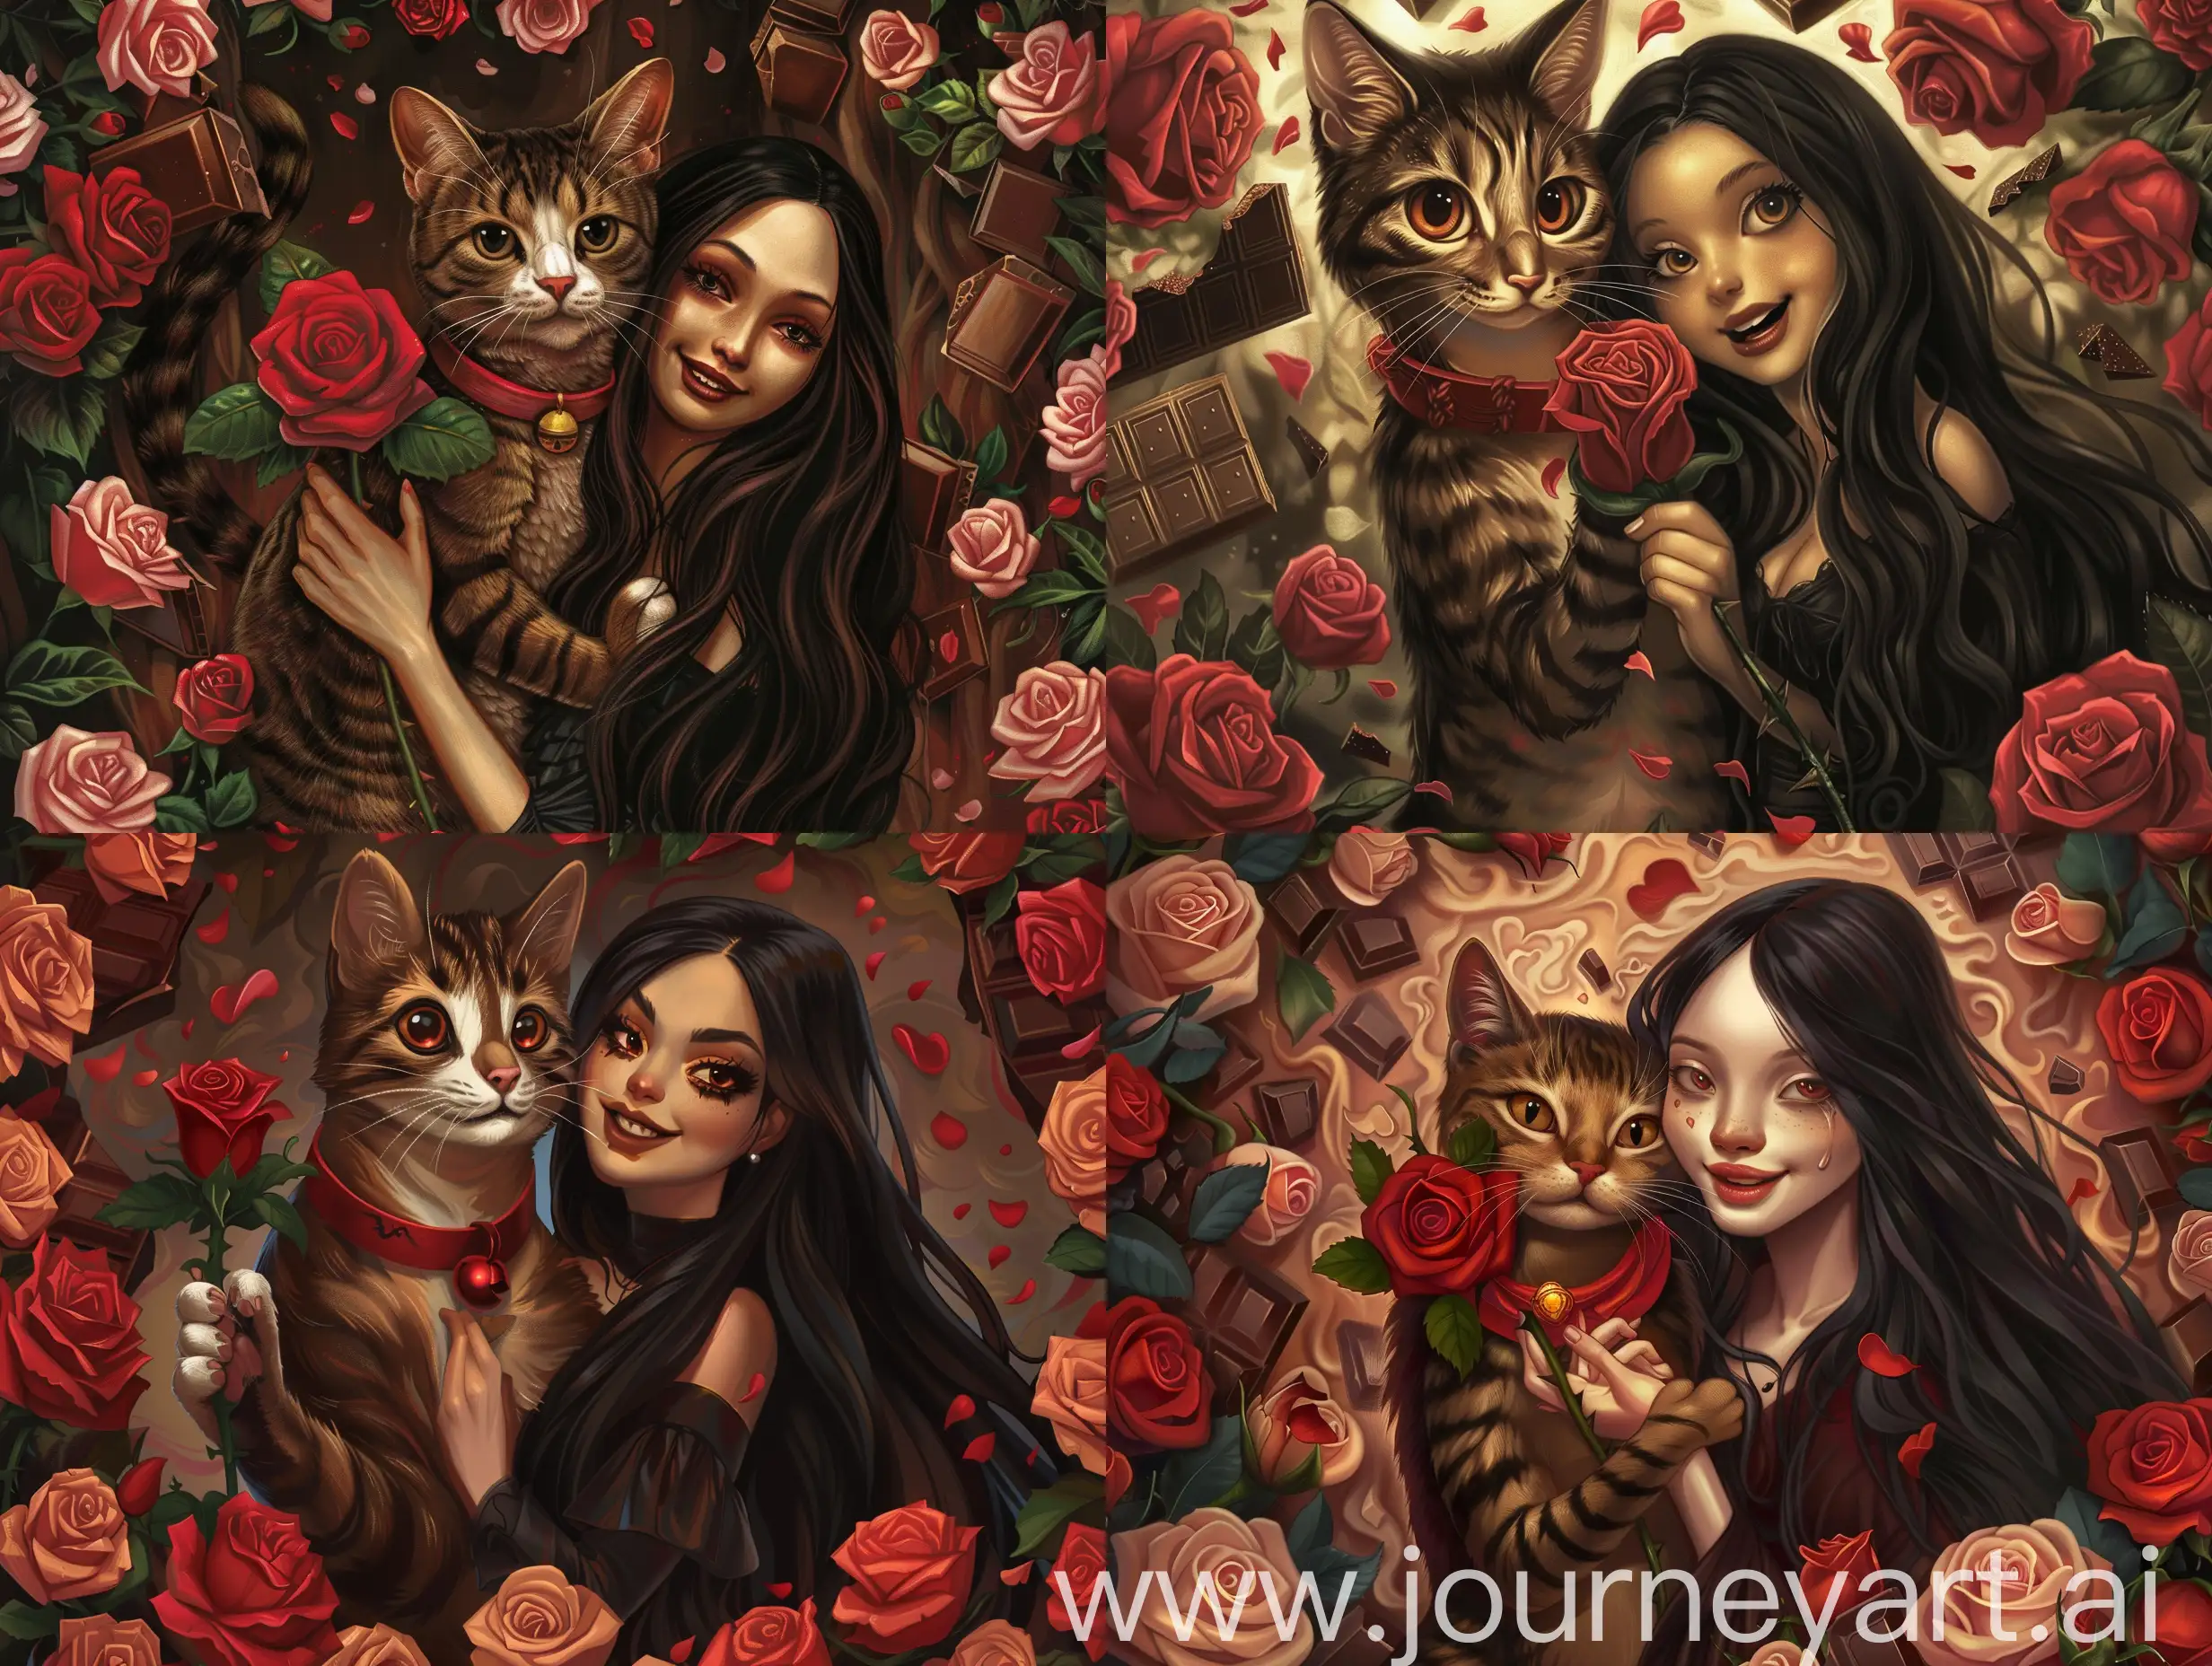 Affectionate-Tabby-Cat-and-Woman-Embracing-Surrounded-by-Roses-and-Chocolate